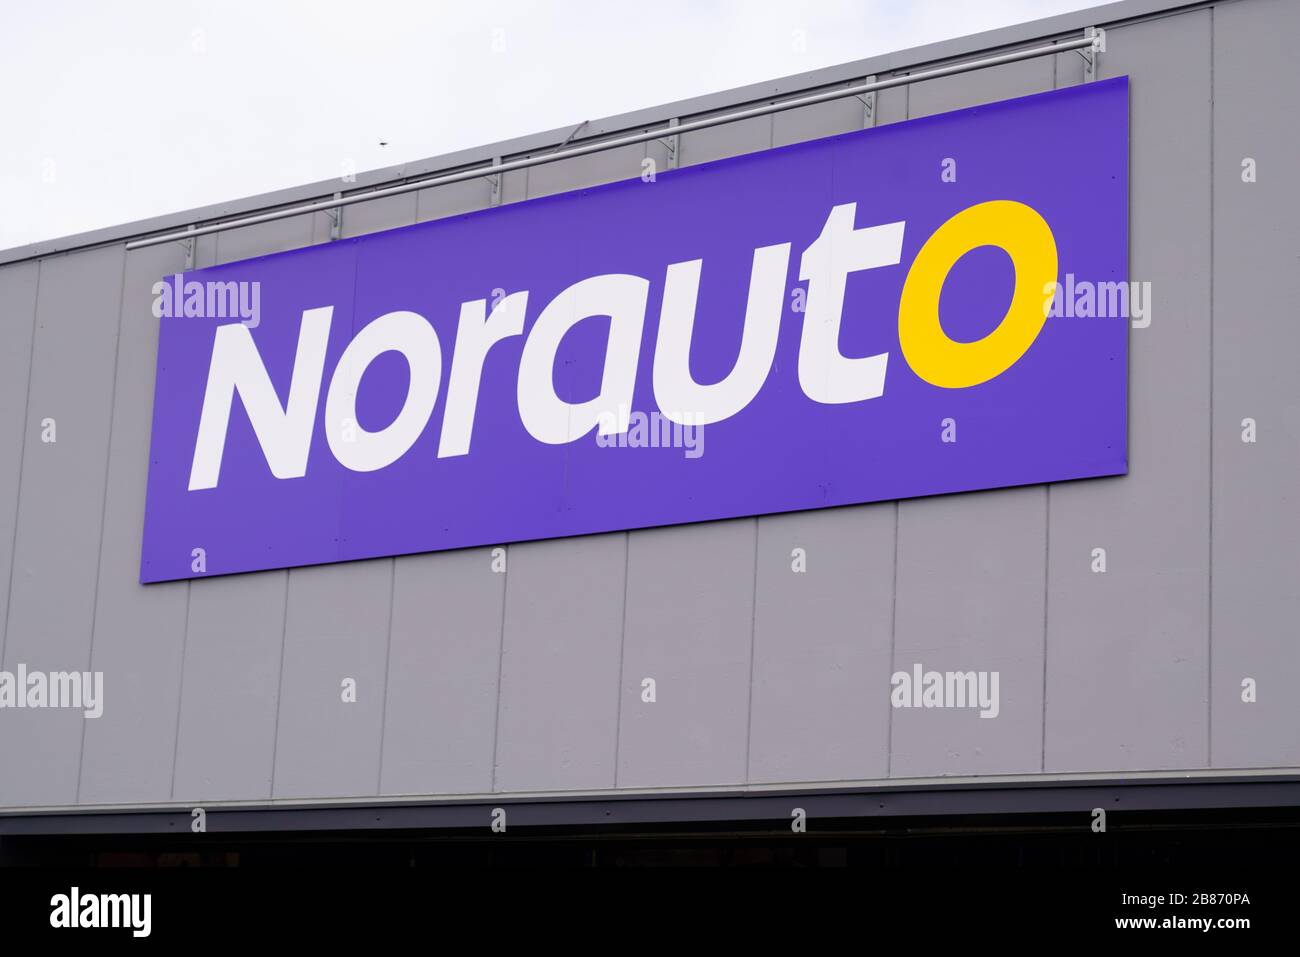 Bordeaux , Aquitaine / France - 09 24 2019 : Norauto logo sign shop french store Automotive Repair and Spare Parts on a wall Stock Photo